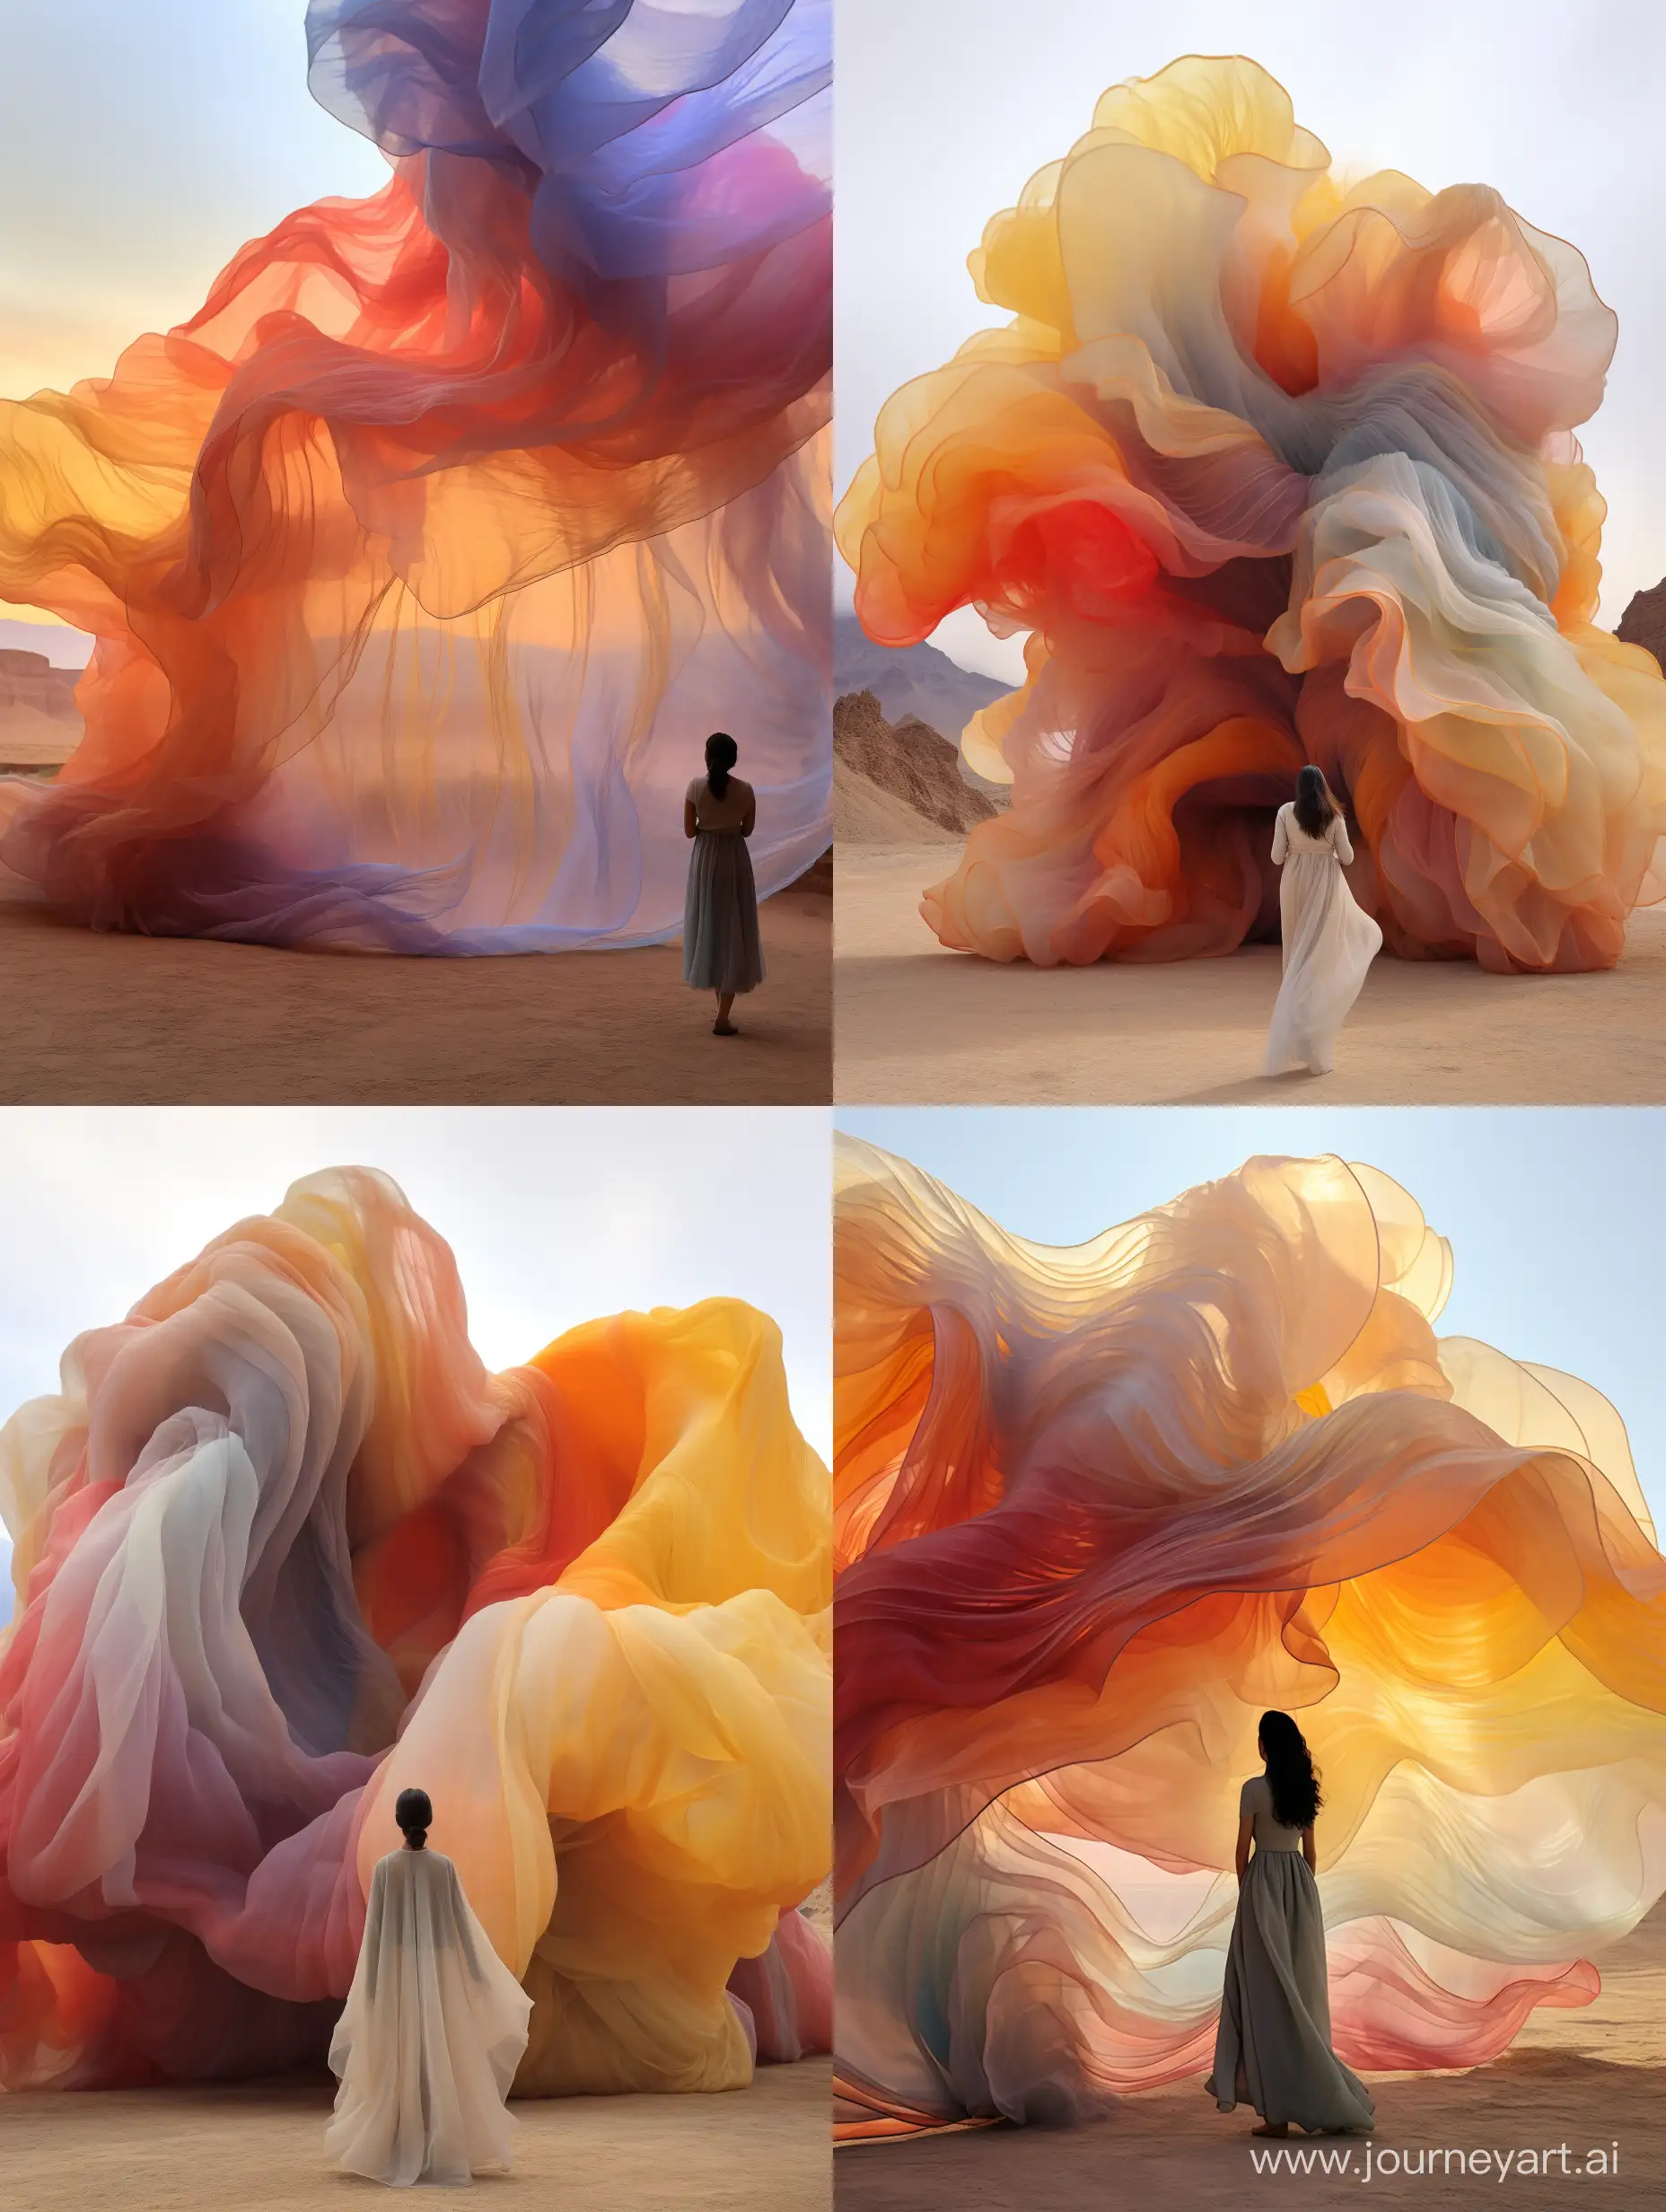 a woman stands outside a big, colorful sculpture, in the style of gauzy atmospheric landscapes, desertwave, transparent/translucent medium, organic formations, photography installations, use of fabric, i can't believe how beautiful this is --s 250